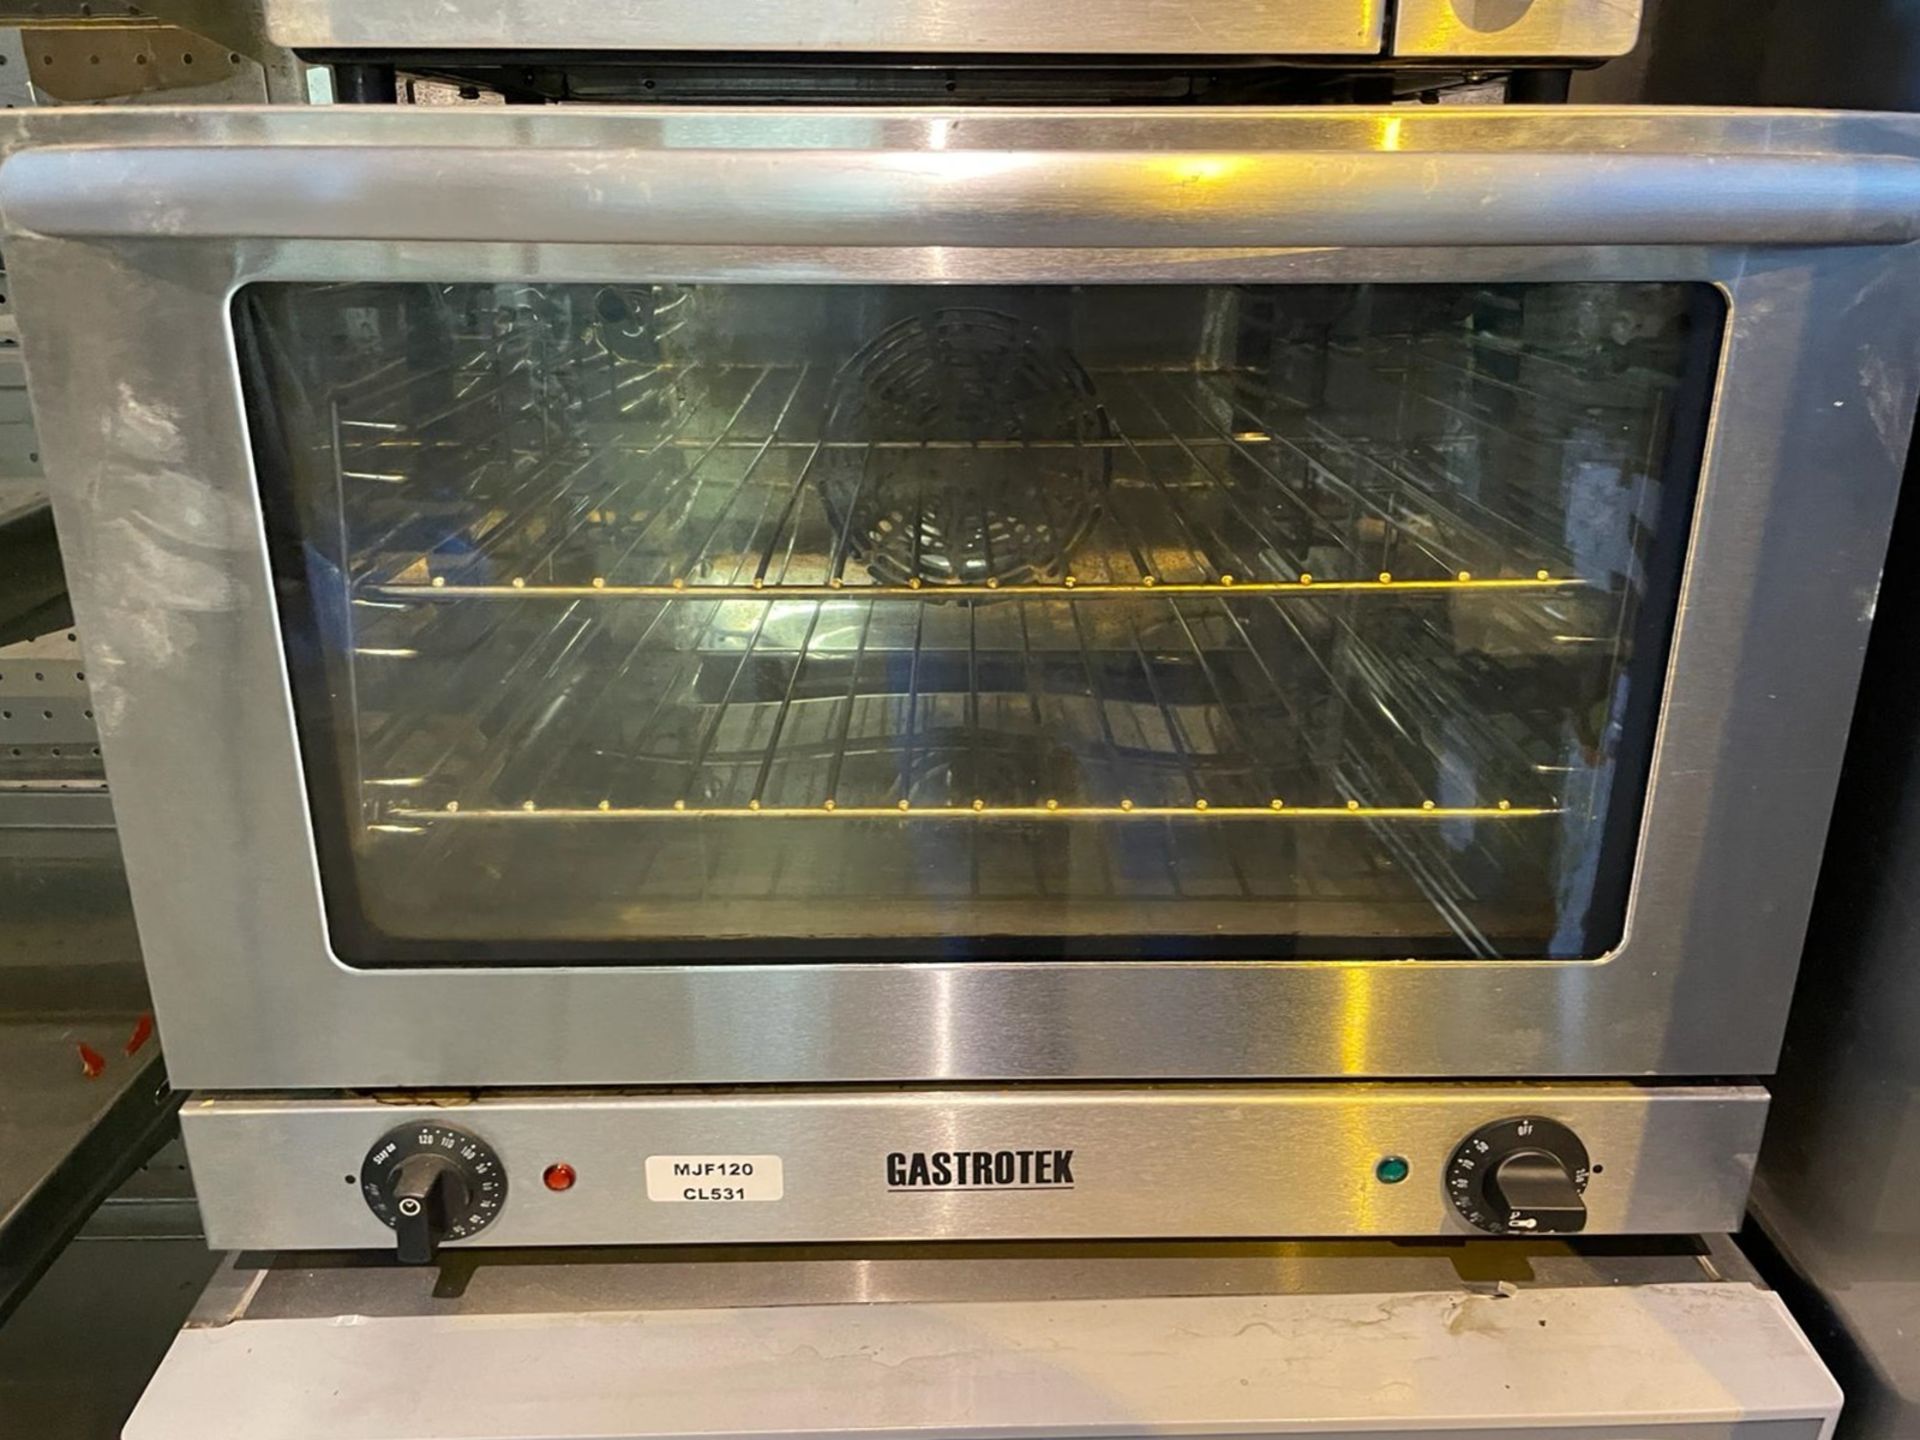 1 x Gastrotek Countertop Commercial Oven With a Stainless Steel Finish - Bild 2 aus 5